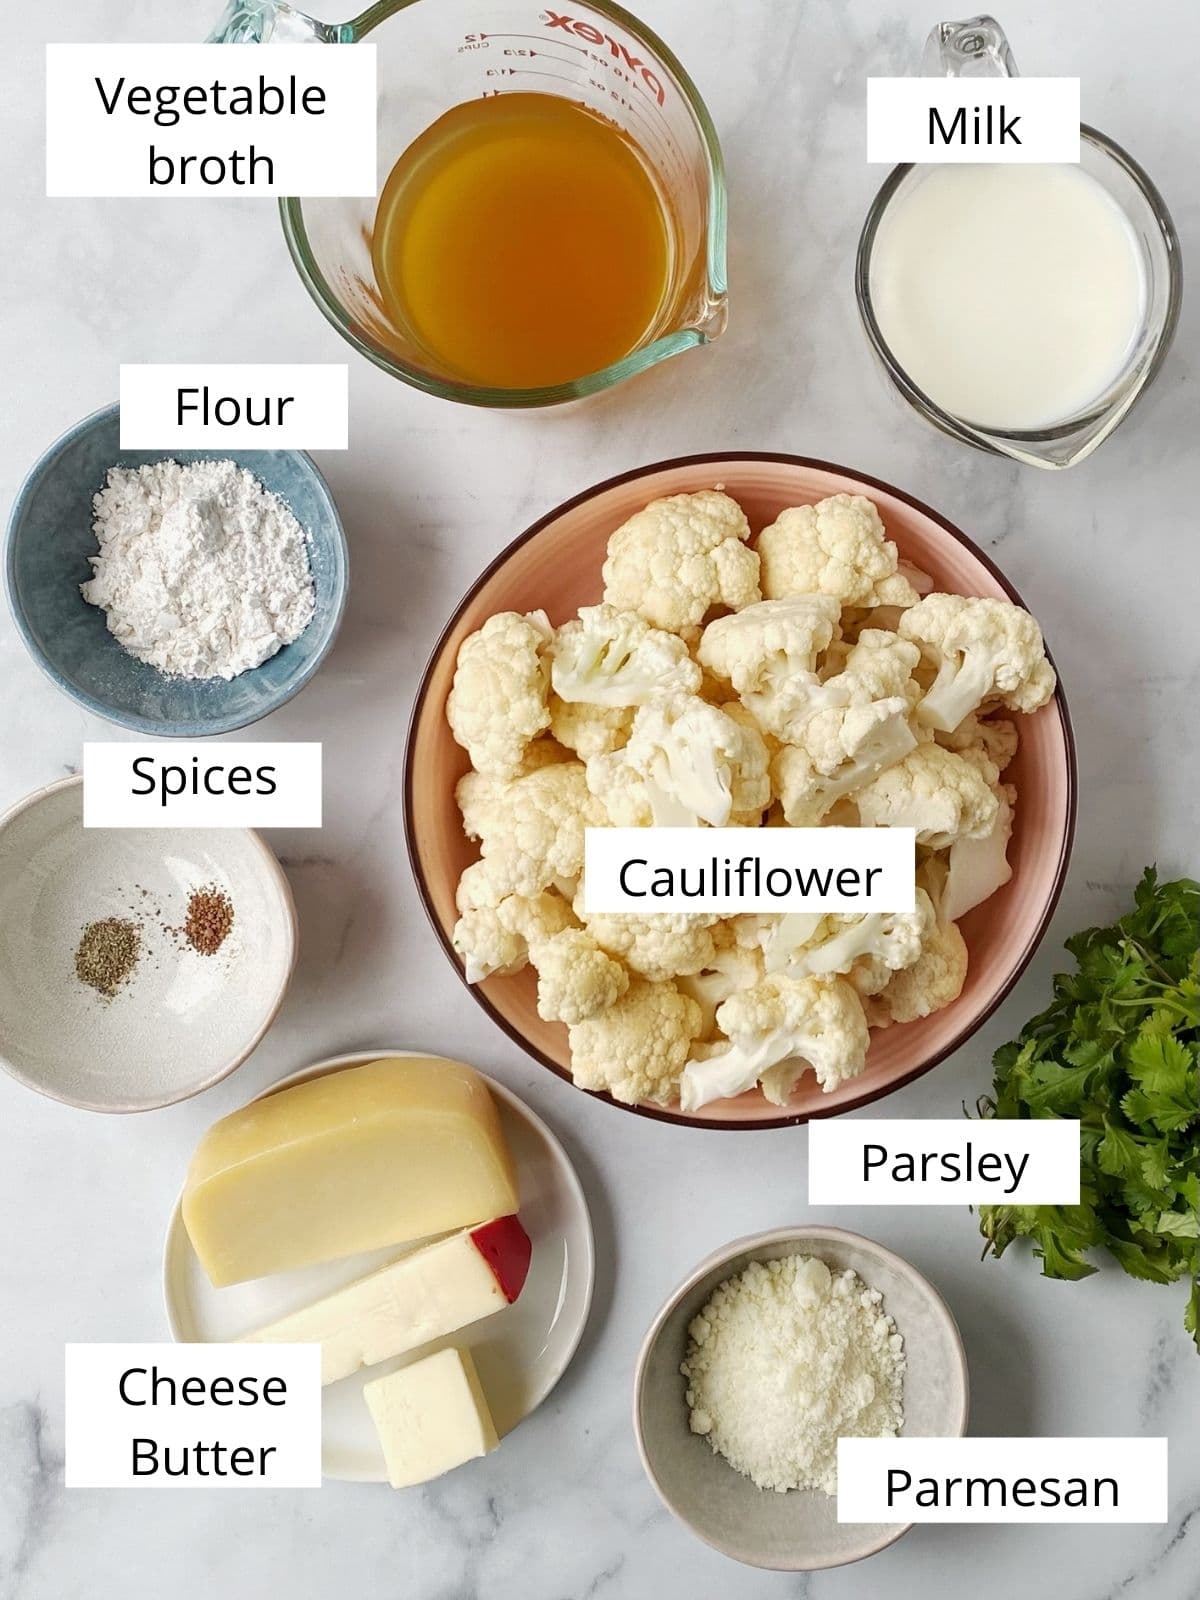 dishes of ingredients - cauliflower, milk, broth, cheese, spices, butter, flour